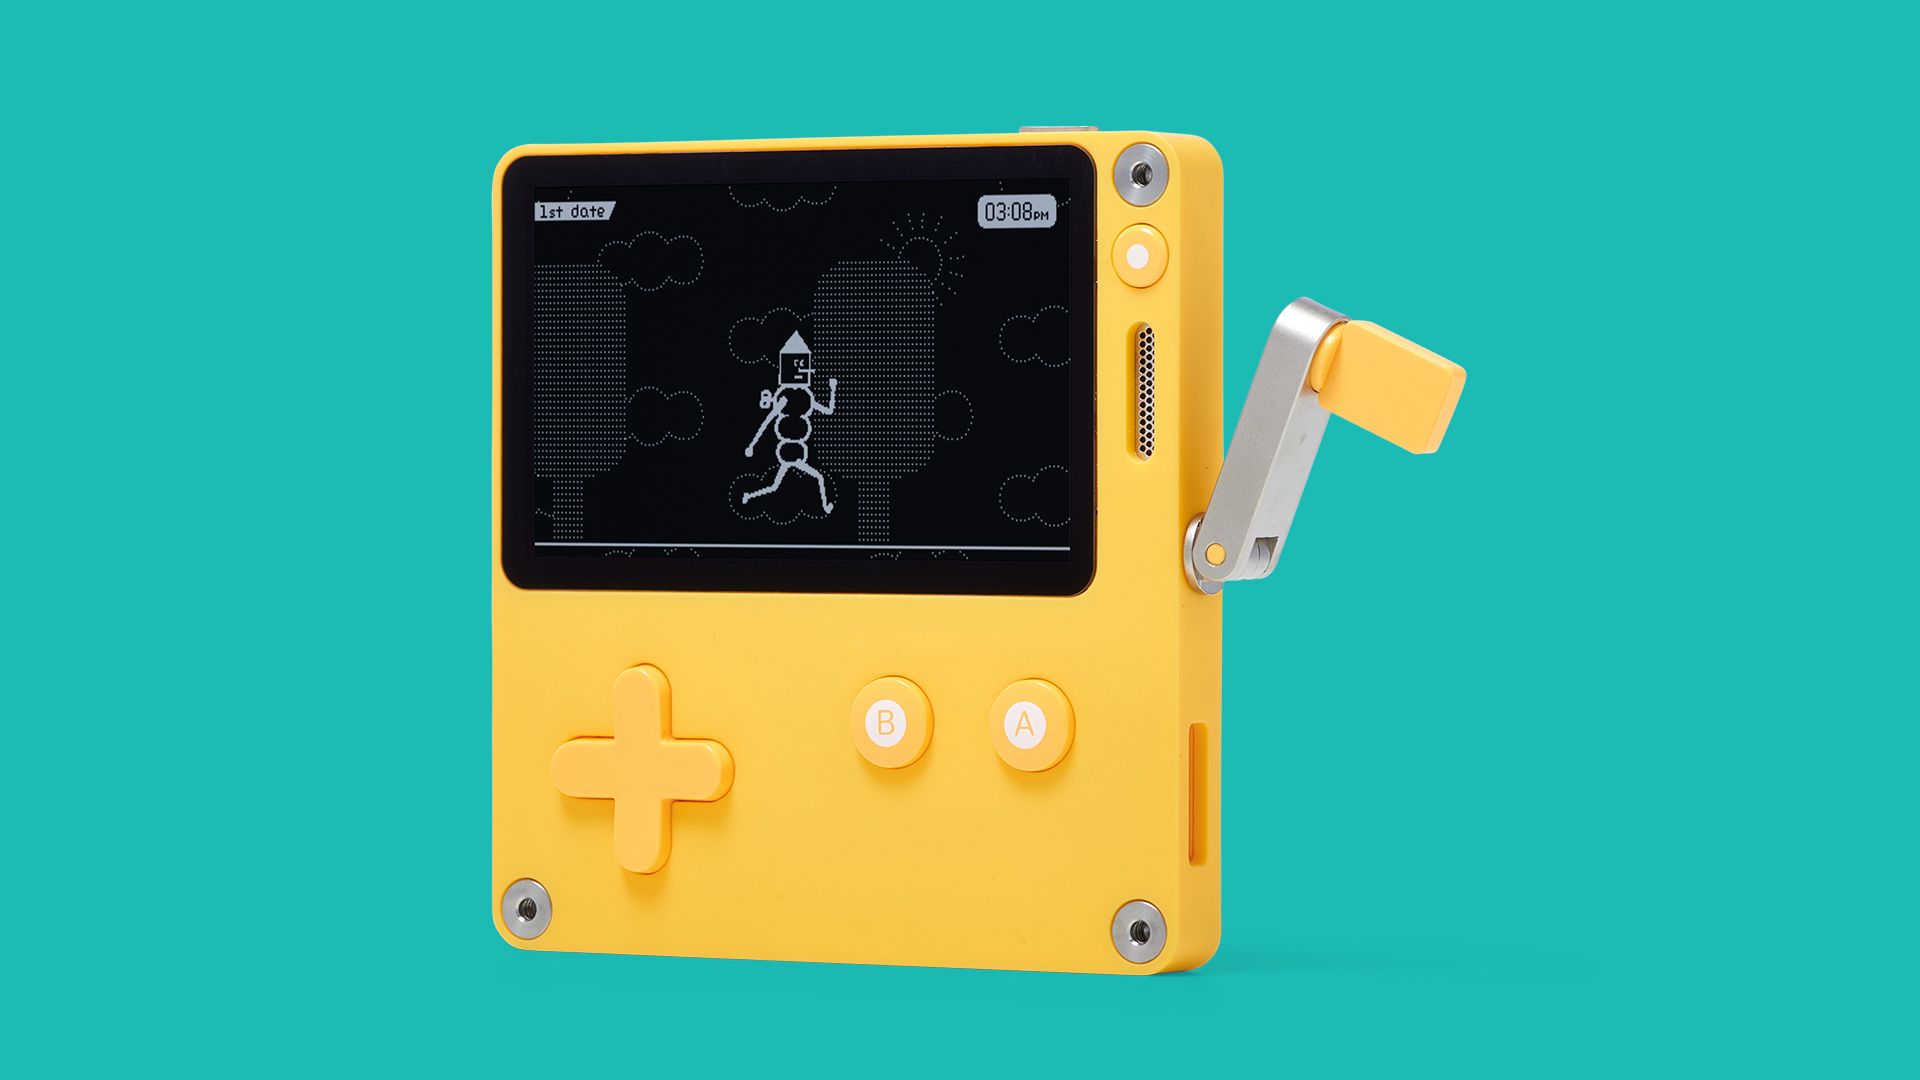 Photo of a yellow Playdate device on a teal background